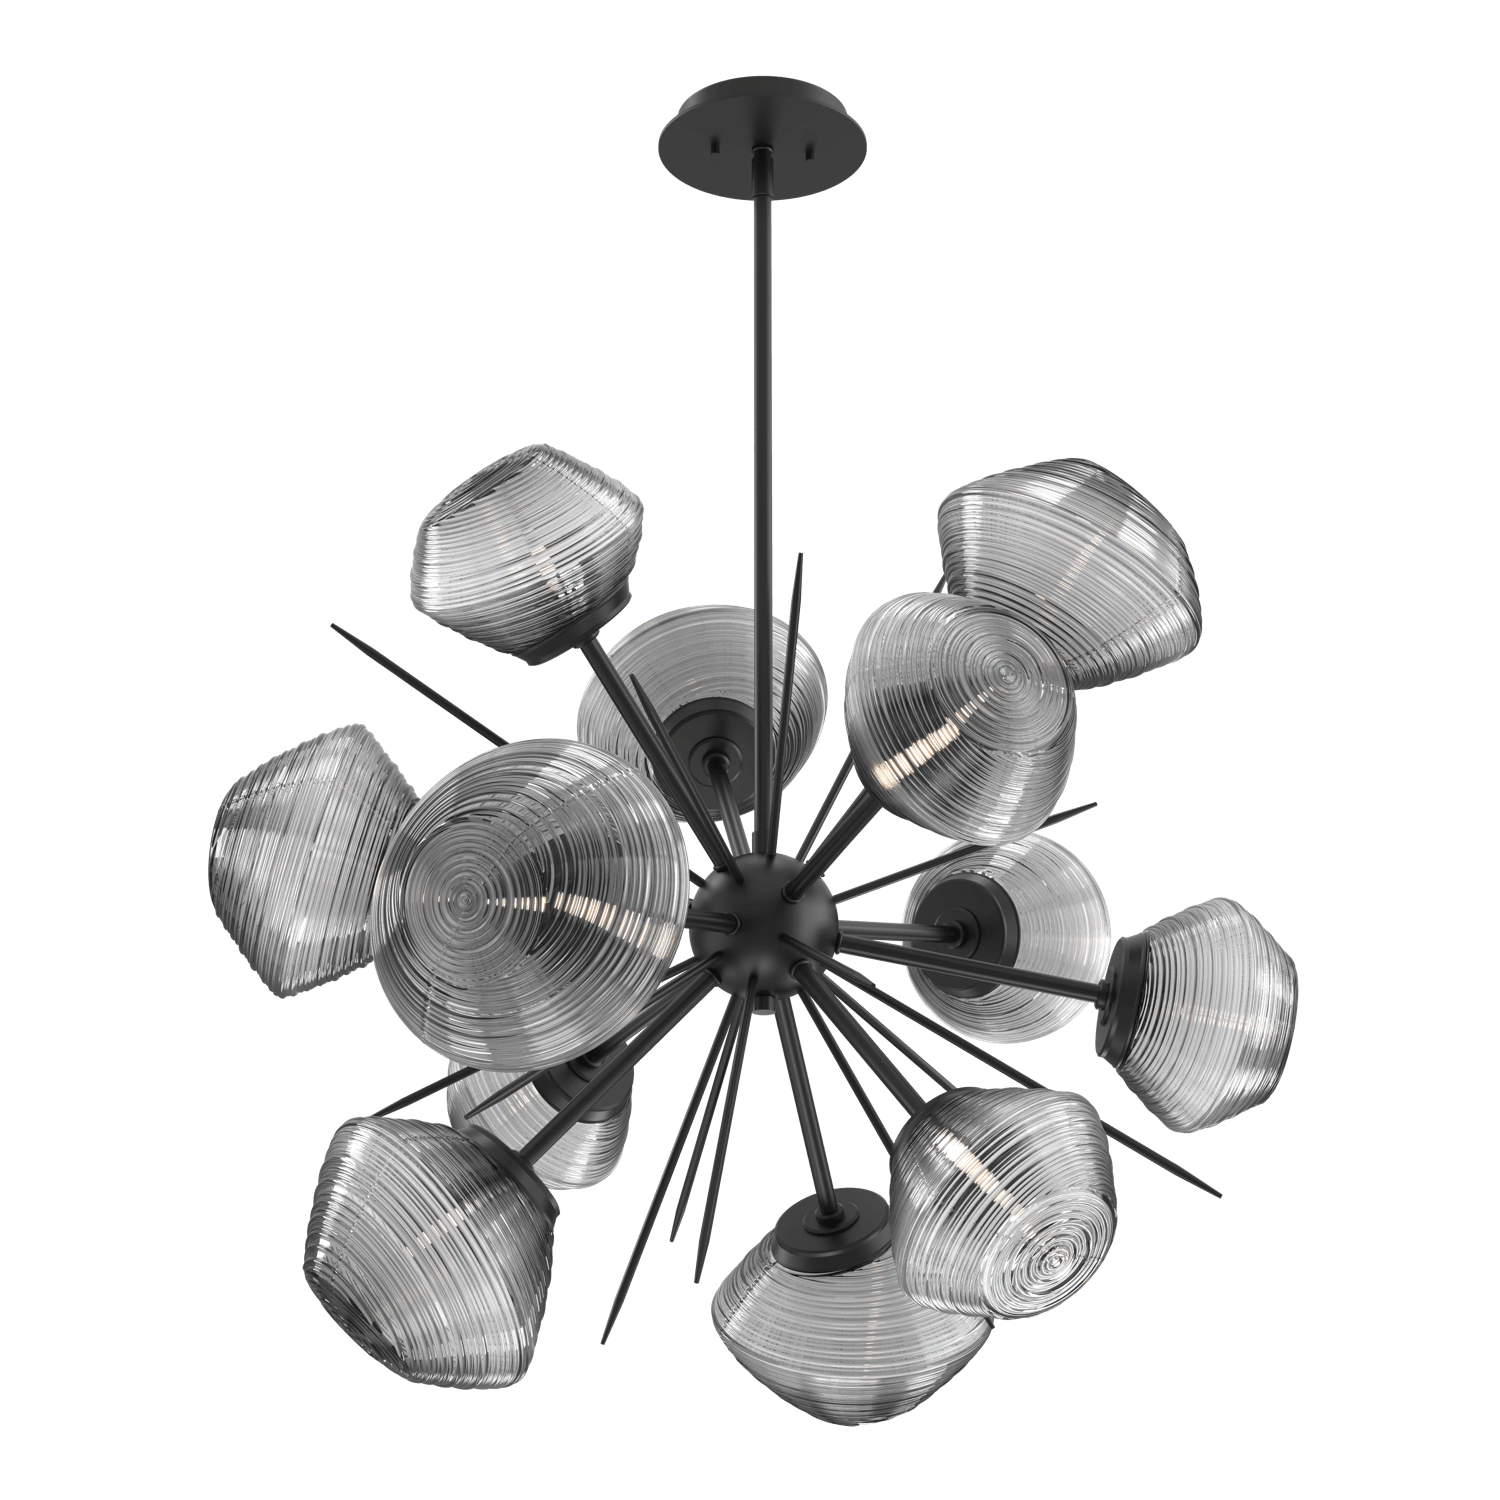 CHB0089-0G-MB-S-Hammerton-Studio-Mesa-36-inch-starburst-chandelier-with-matte-black-finish-and-smoke-blown-glass-shades-and-LED-lamping